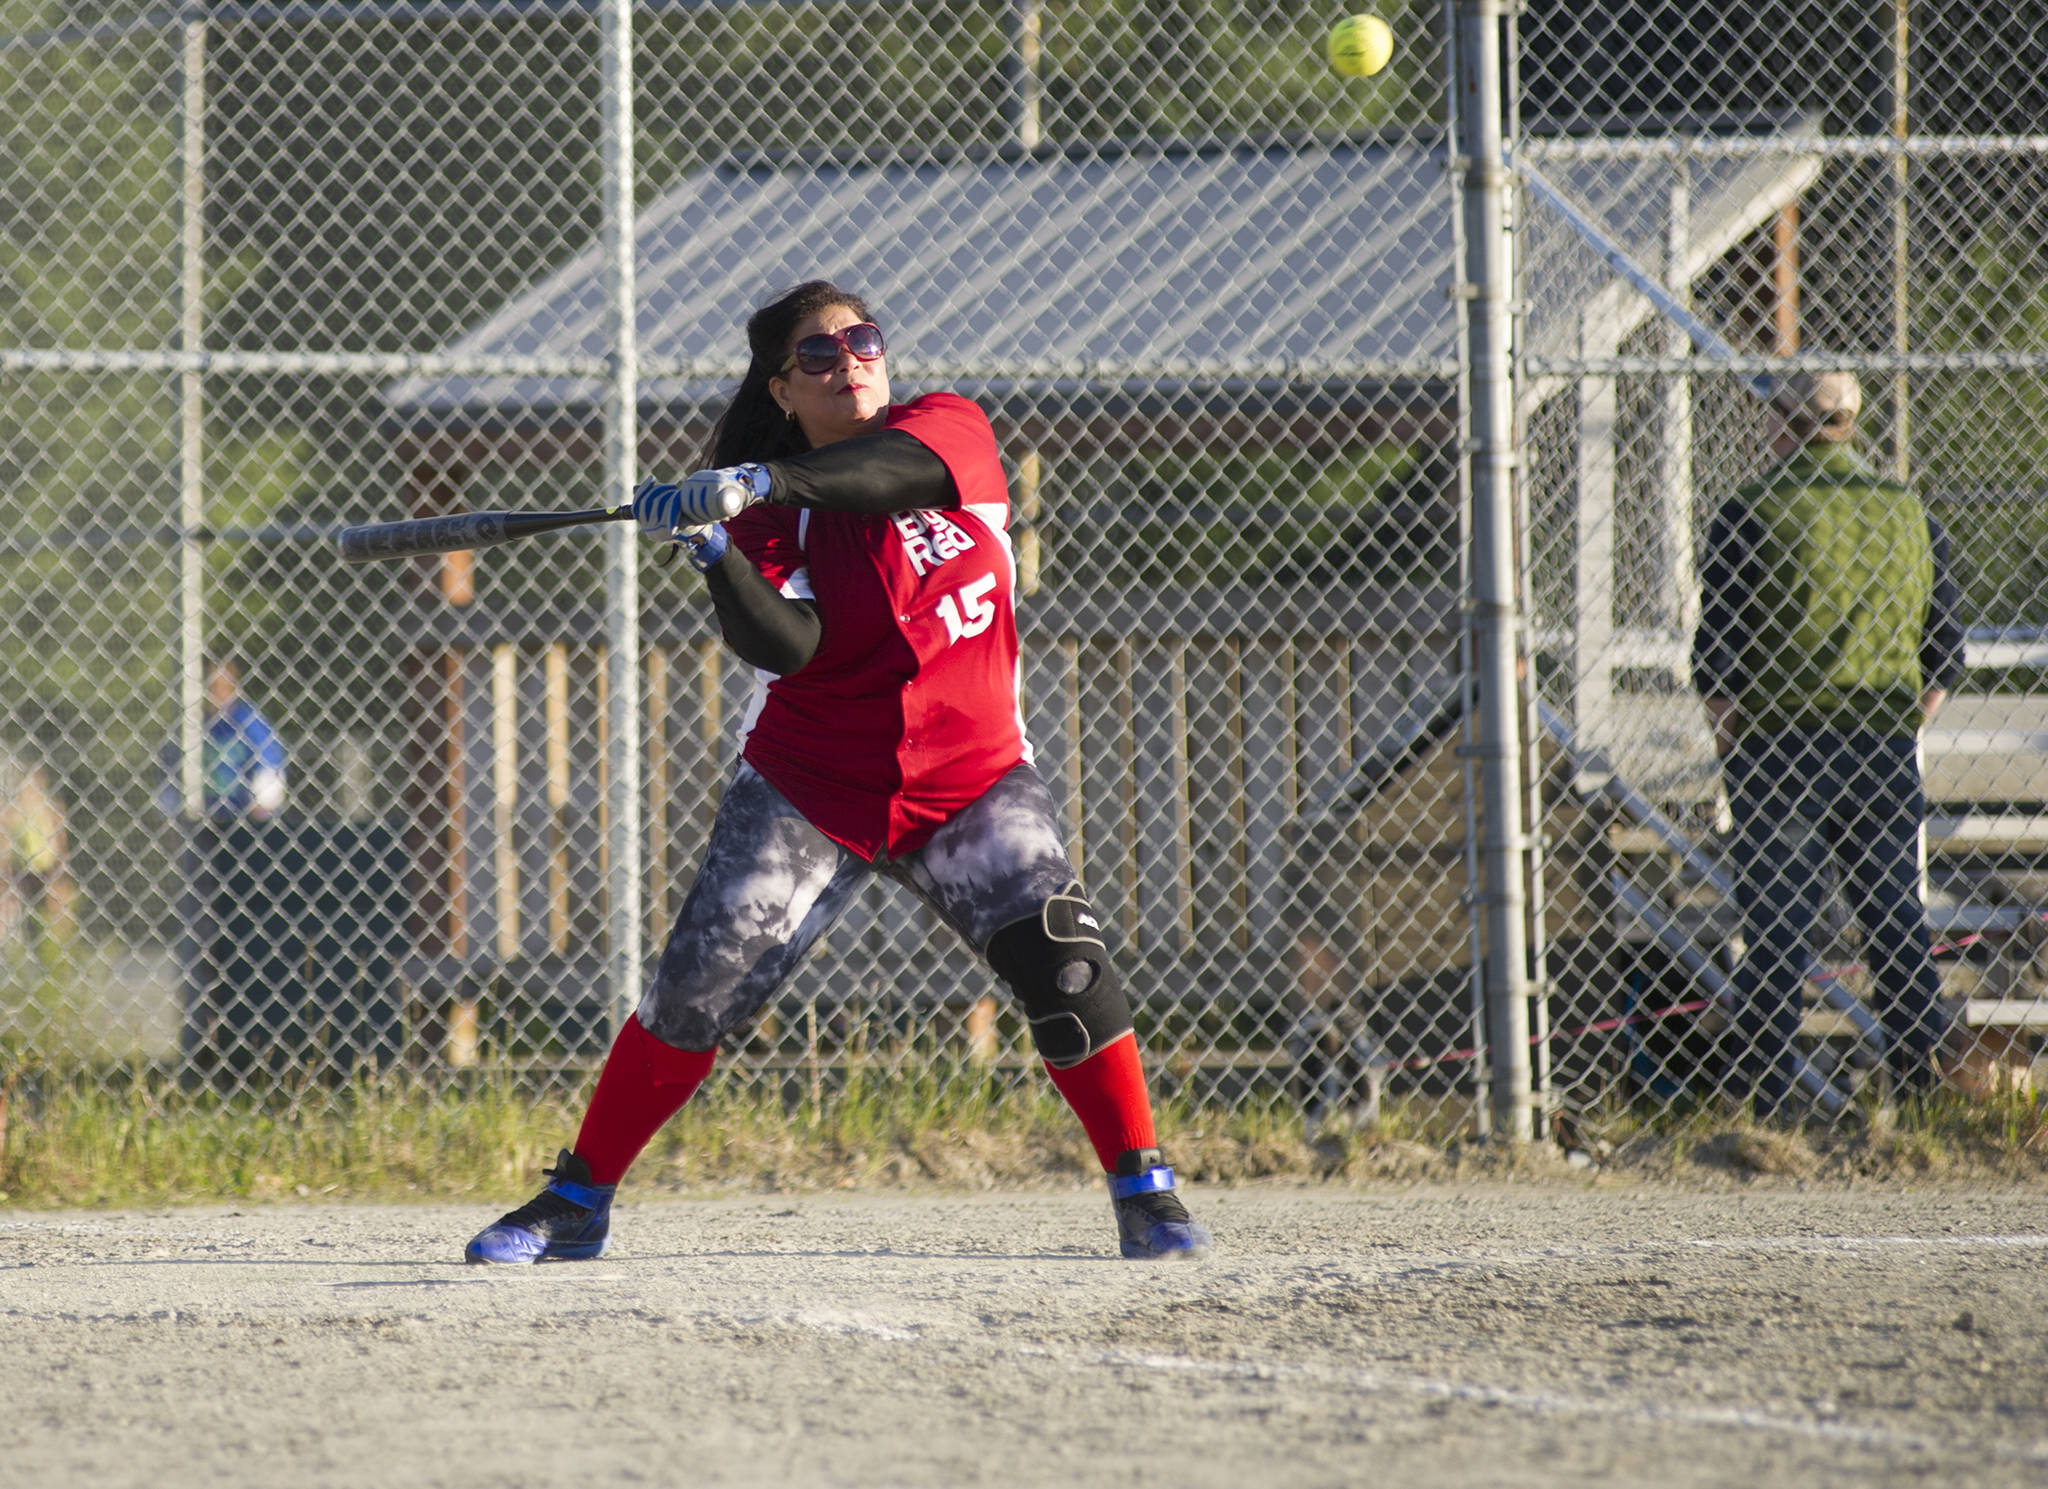 Big Red’s Dany Reyes lines up the ball at the 14th annual Capital City Coed Softball Tournament at Dimond Park on Friday, June 8, 2018. Big Red defeated Dirty Dozen 14-12. (Nolin Ainsworth | Juneau Empire)